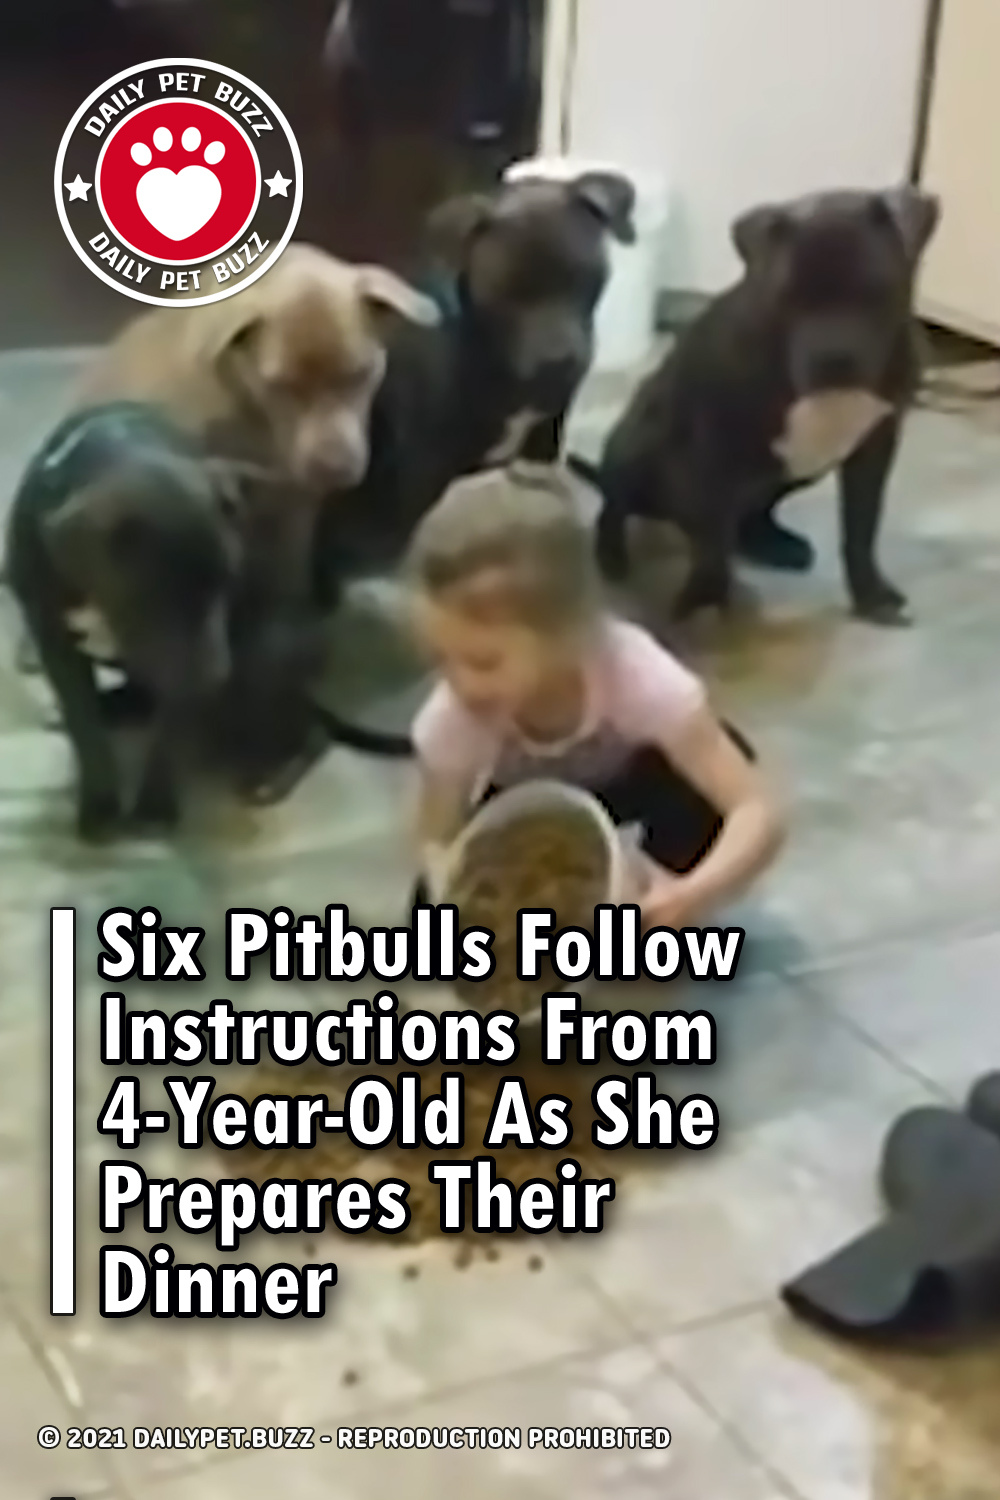 Six Pitbulls Follow Instructions From 4-Year-Old As She Prepares Their Dinner